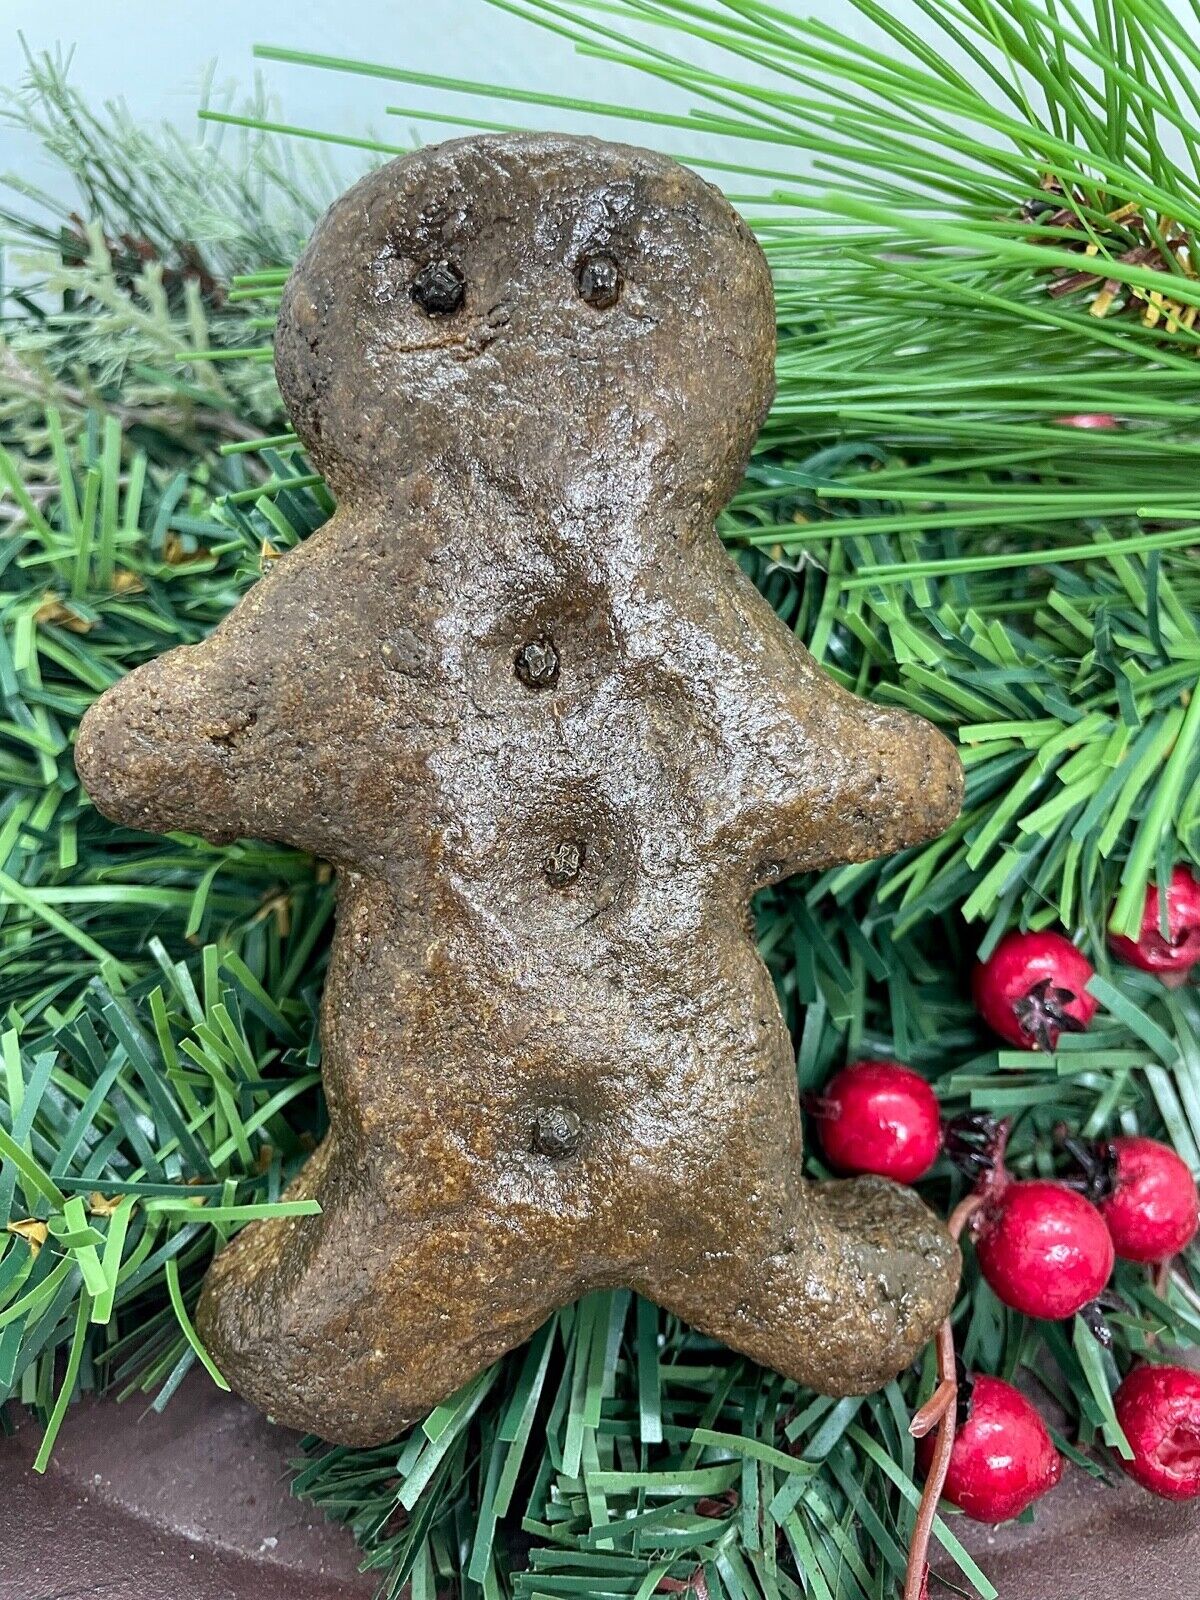 Primitive Christmas 6” Handmade Chunky Gingerbread Man Bowl Filler - The Primitive Pineapple Collection